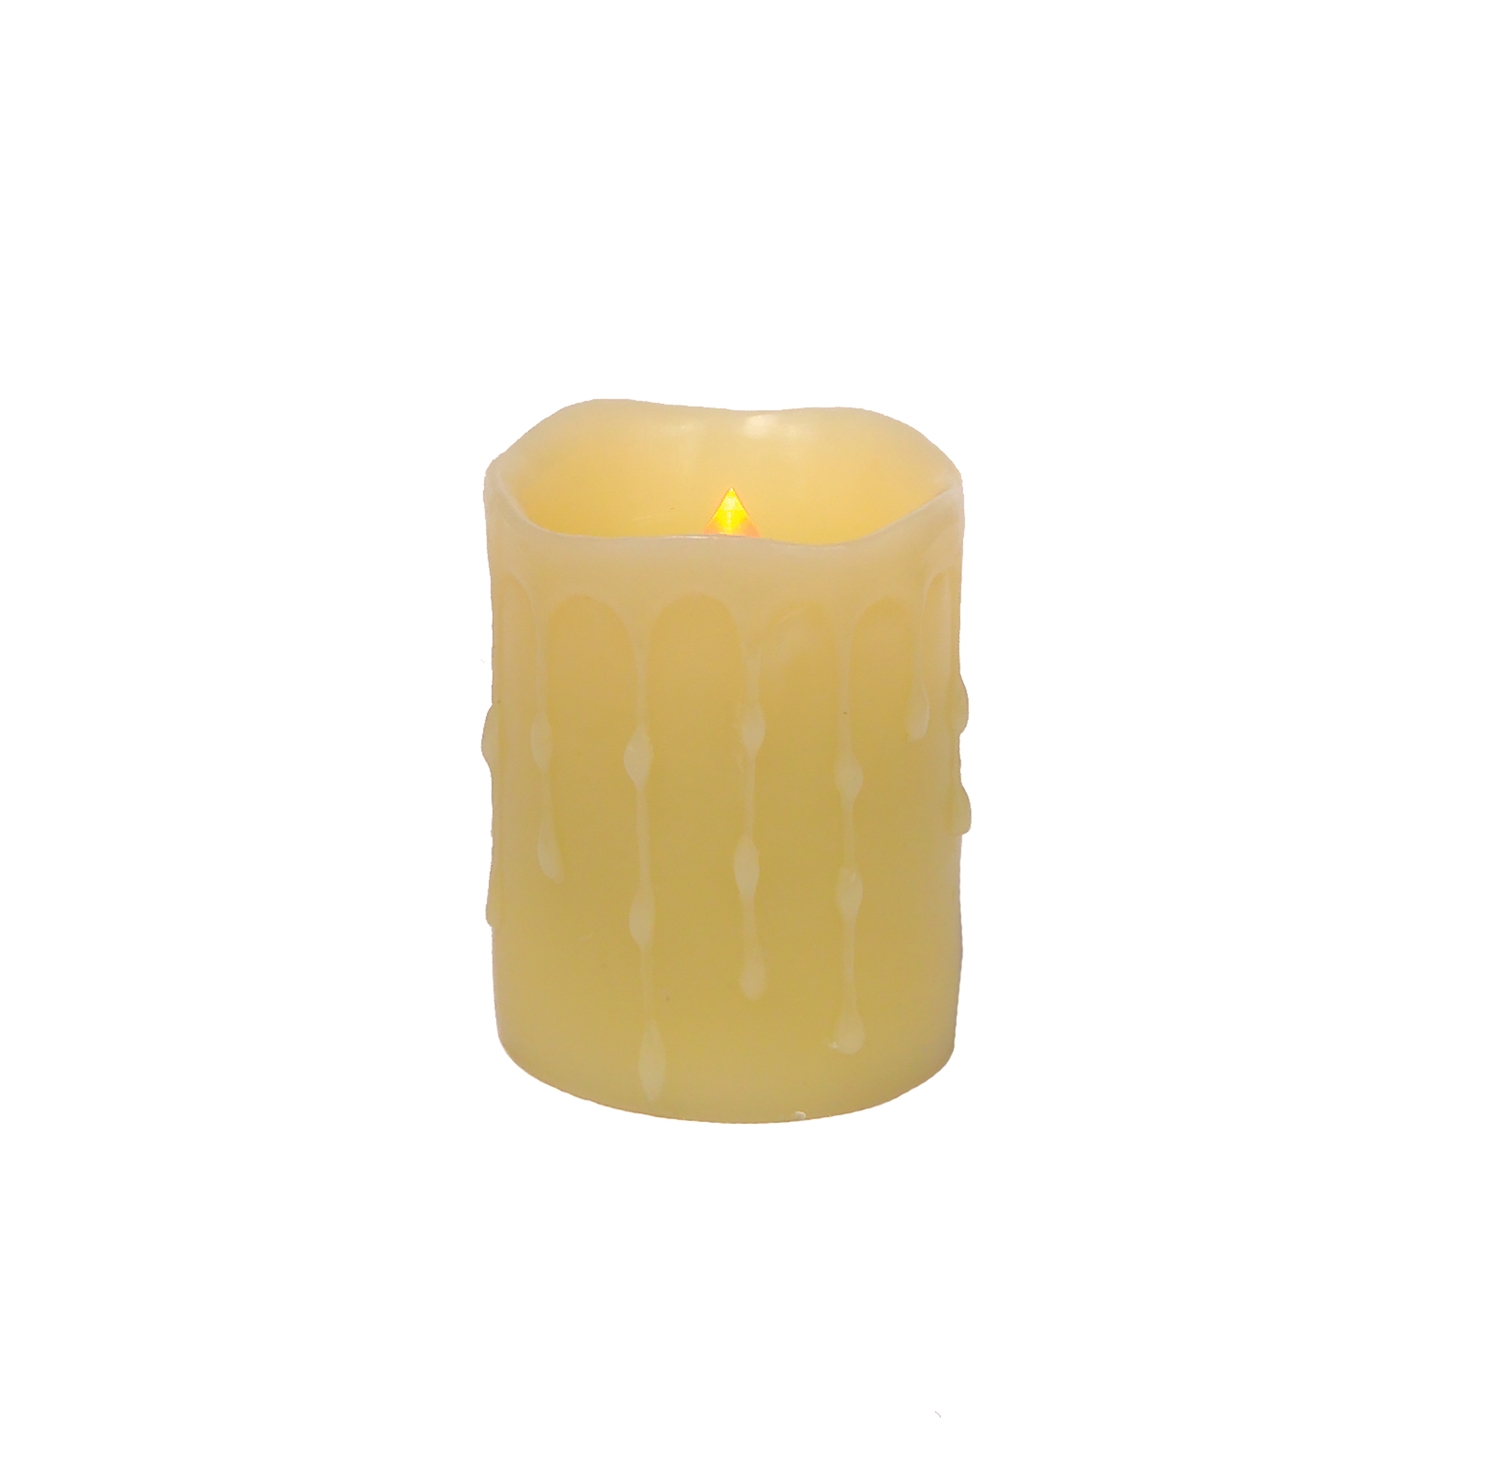 LED Wax Dripping Pillar Candle (Set of 4) 3"Dx4"H Wax/Plastic - 2 C Batteries Not Incld